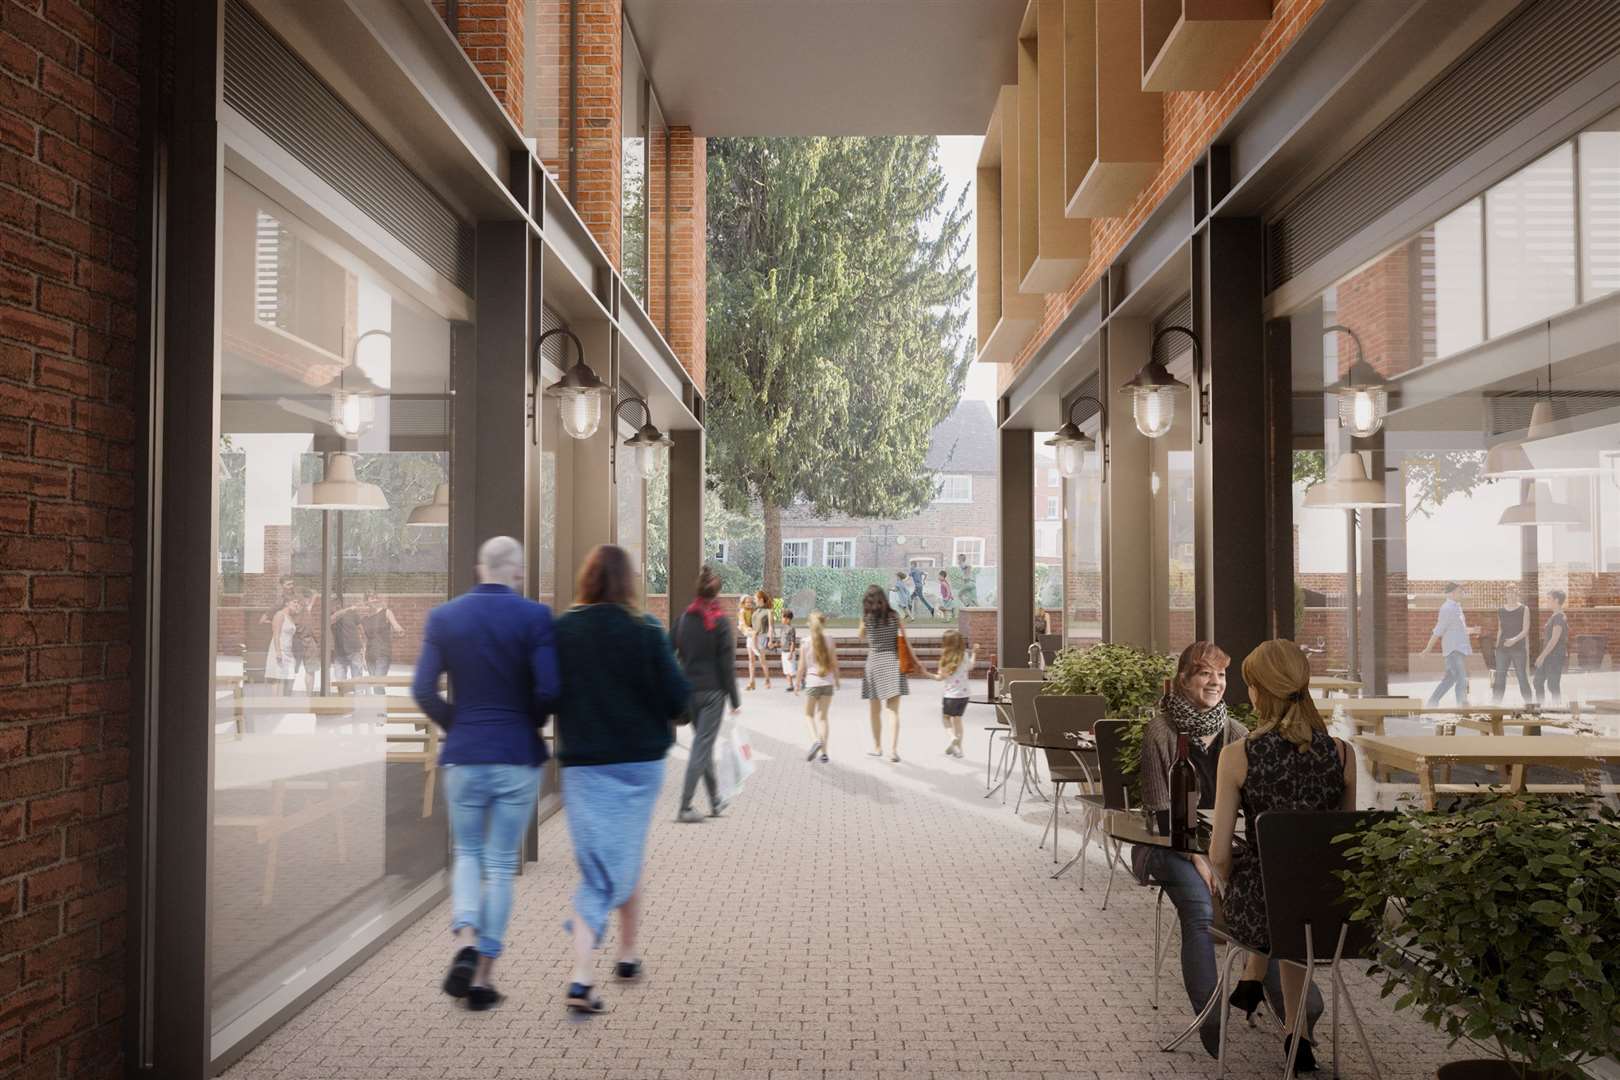 New walkways will be installed as part of the £30m project